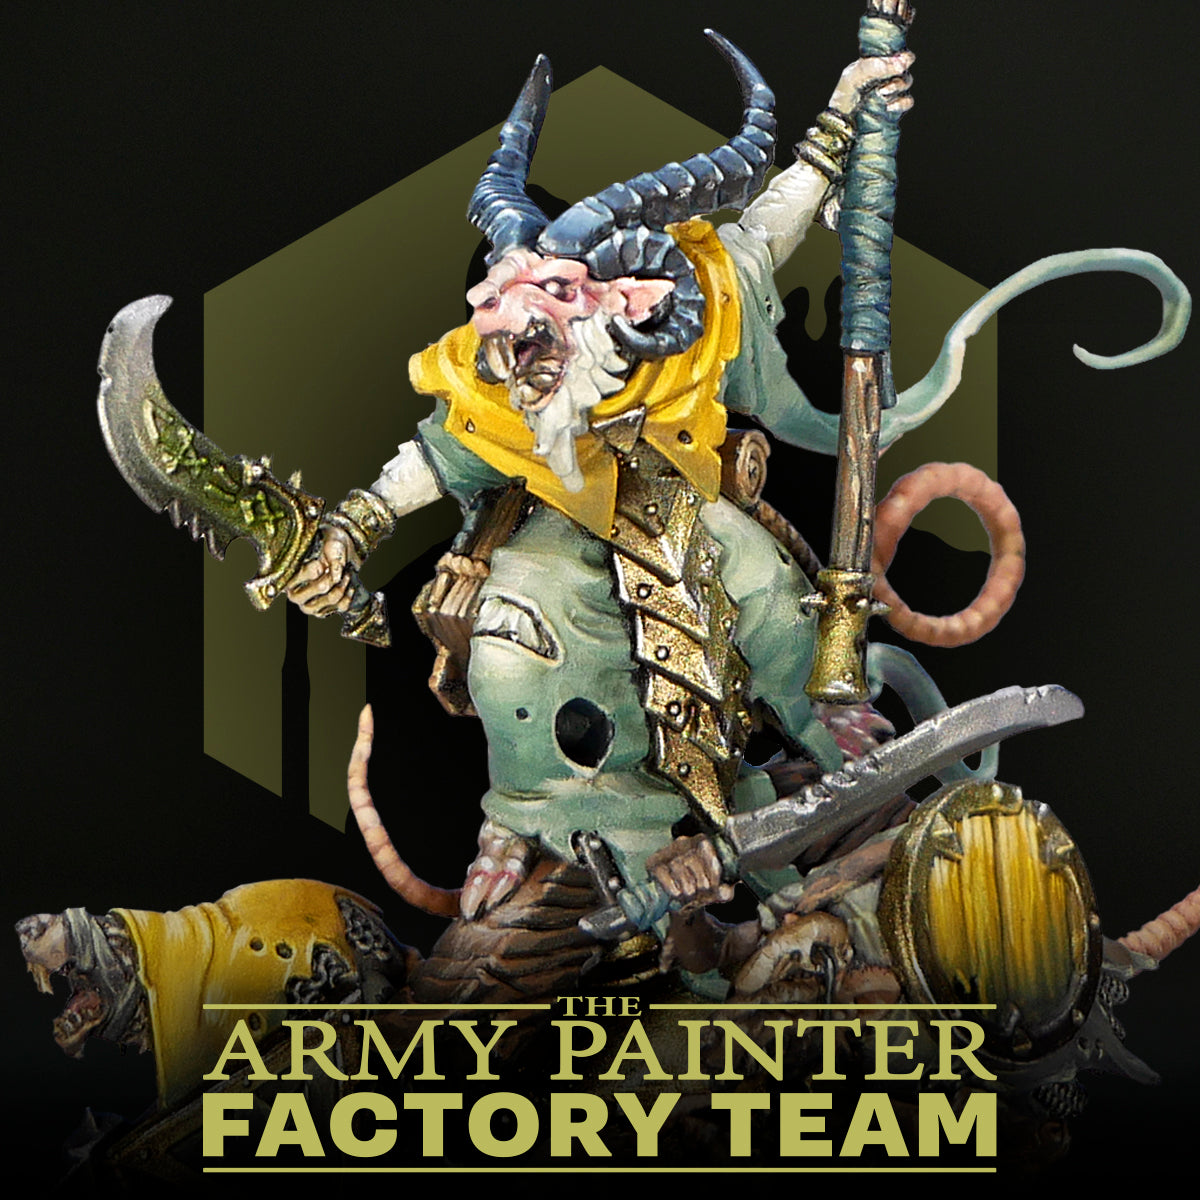 The Army Painter Factory Team Conquers the Skaventide